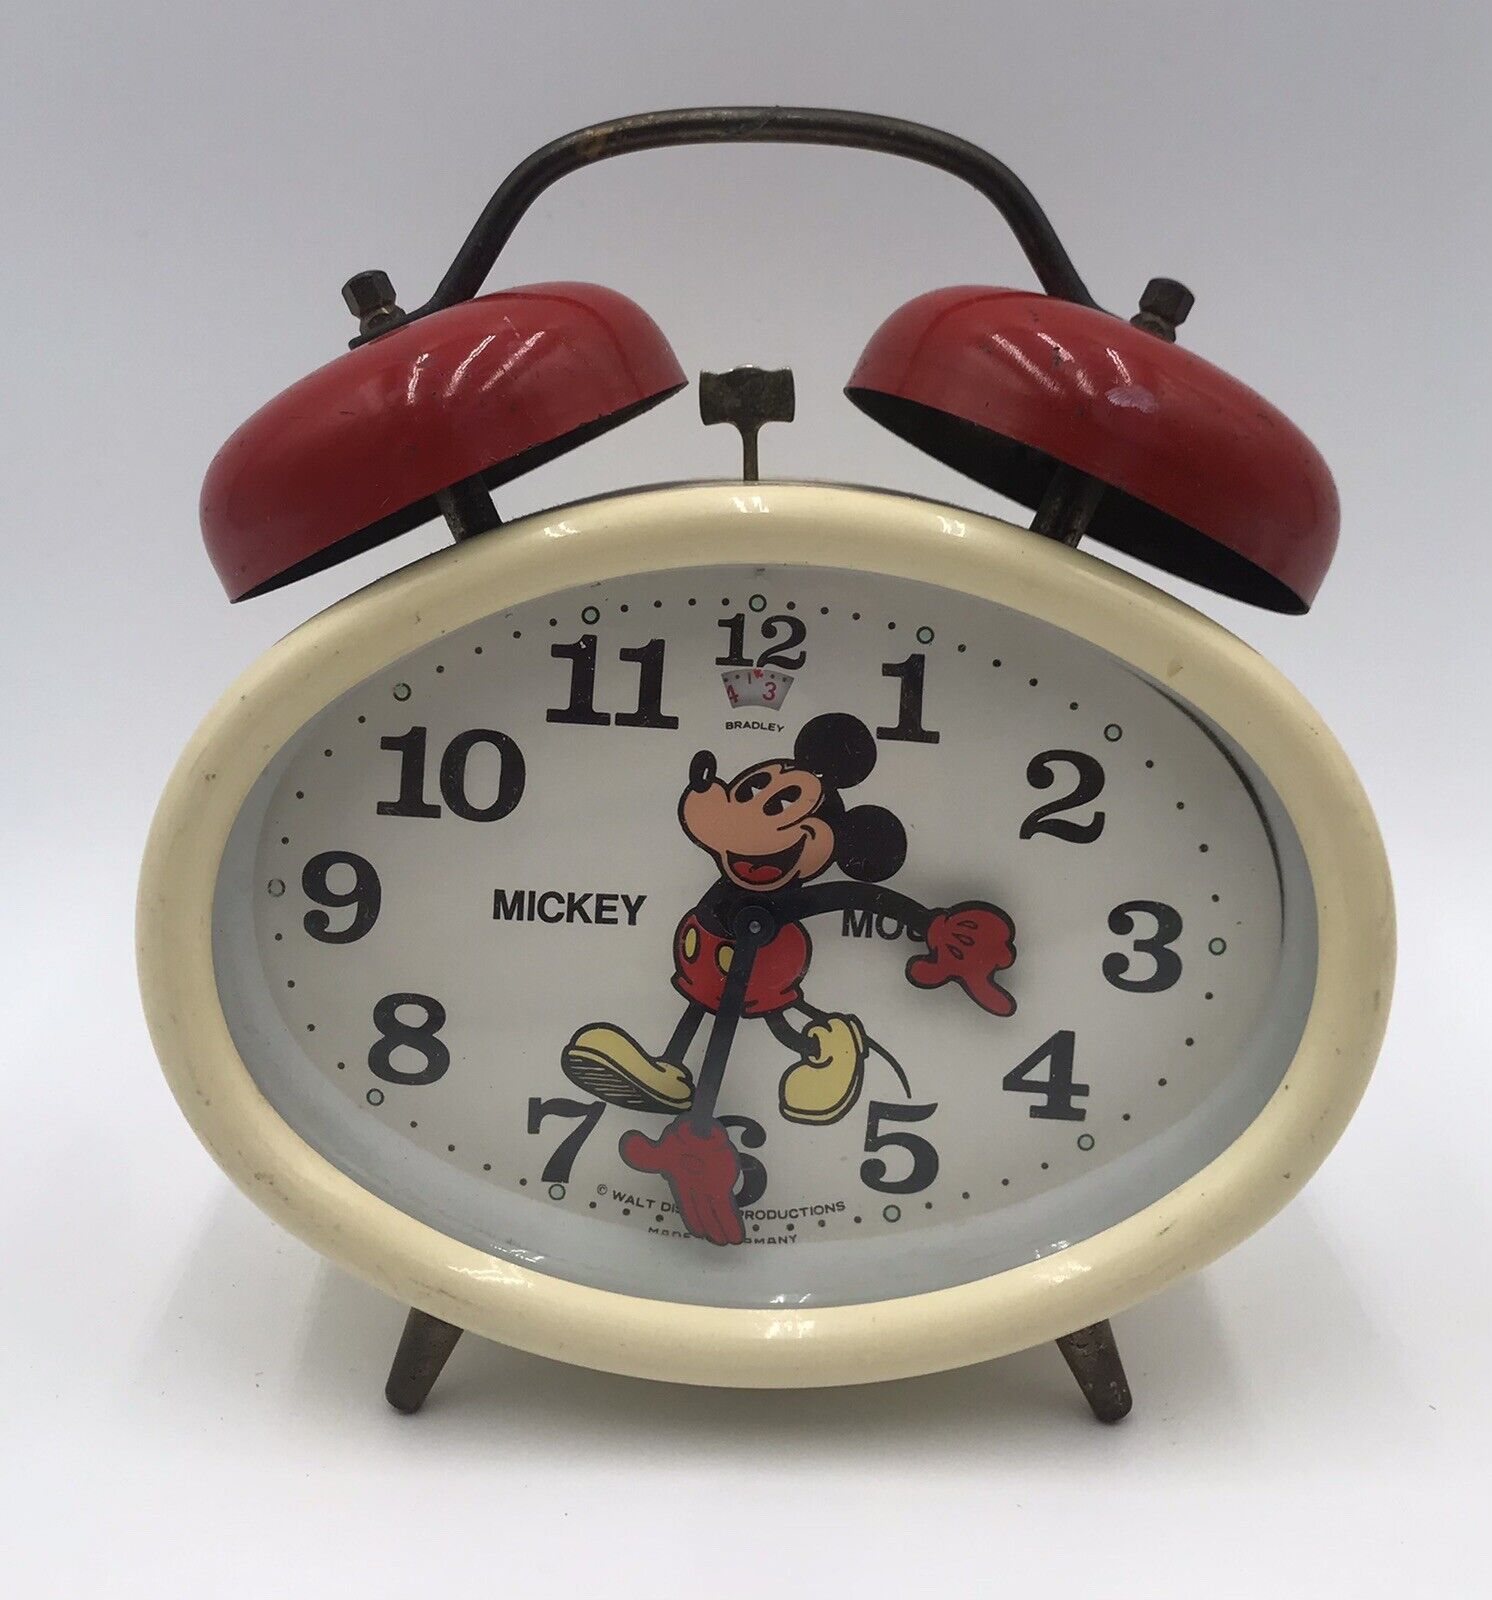 VINTAGE OVAL WHITE AND RED MICKEY MOUSE ALARM CLOCK.BRADLEY.GERMANY